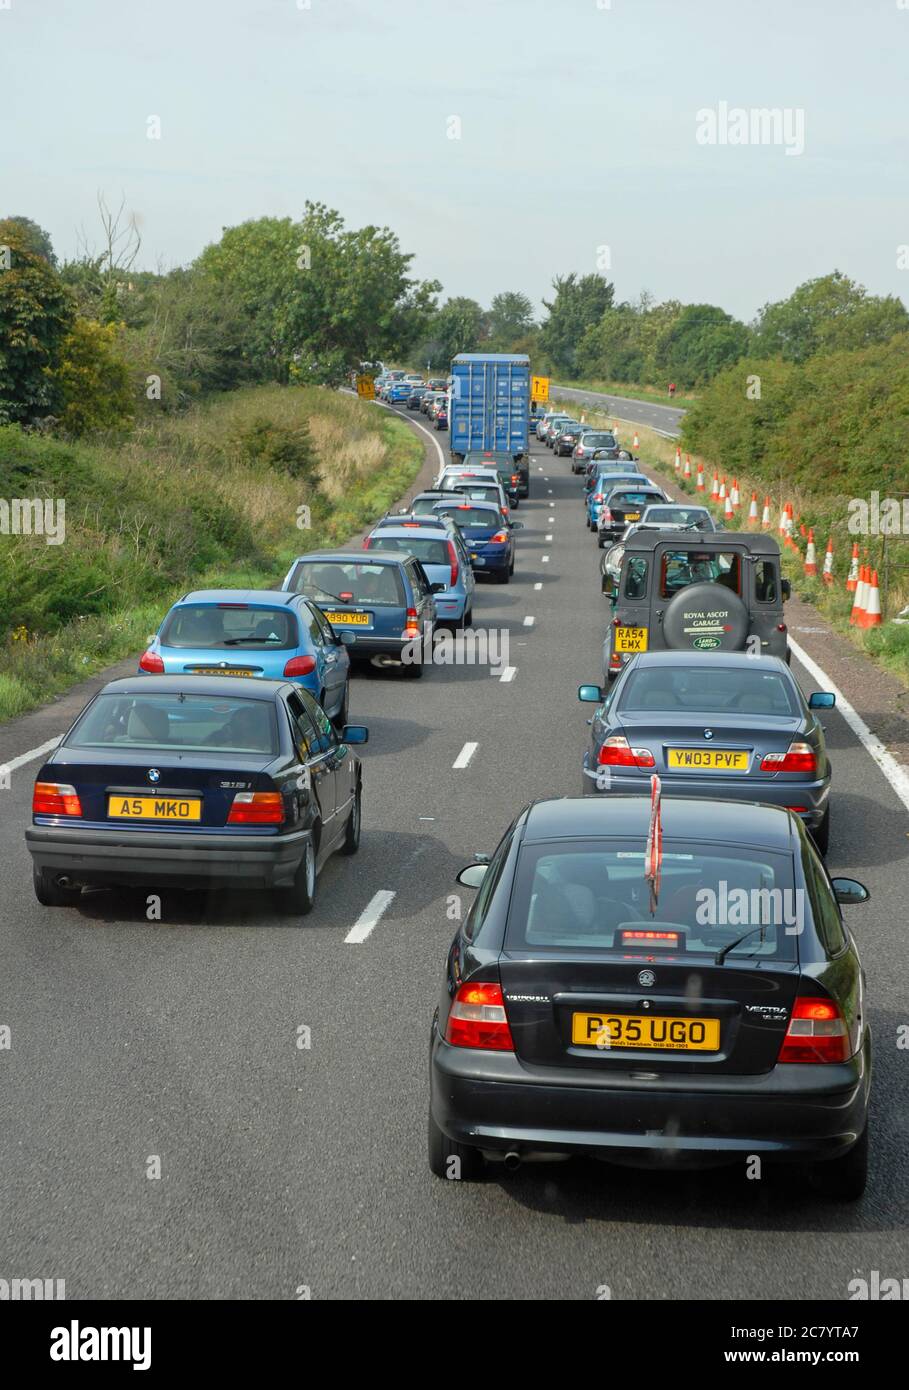 Queue of stationary traffic waiting to join major road at a time when traffic is heavy Stock Photo